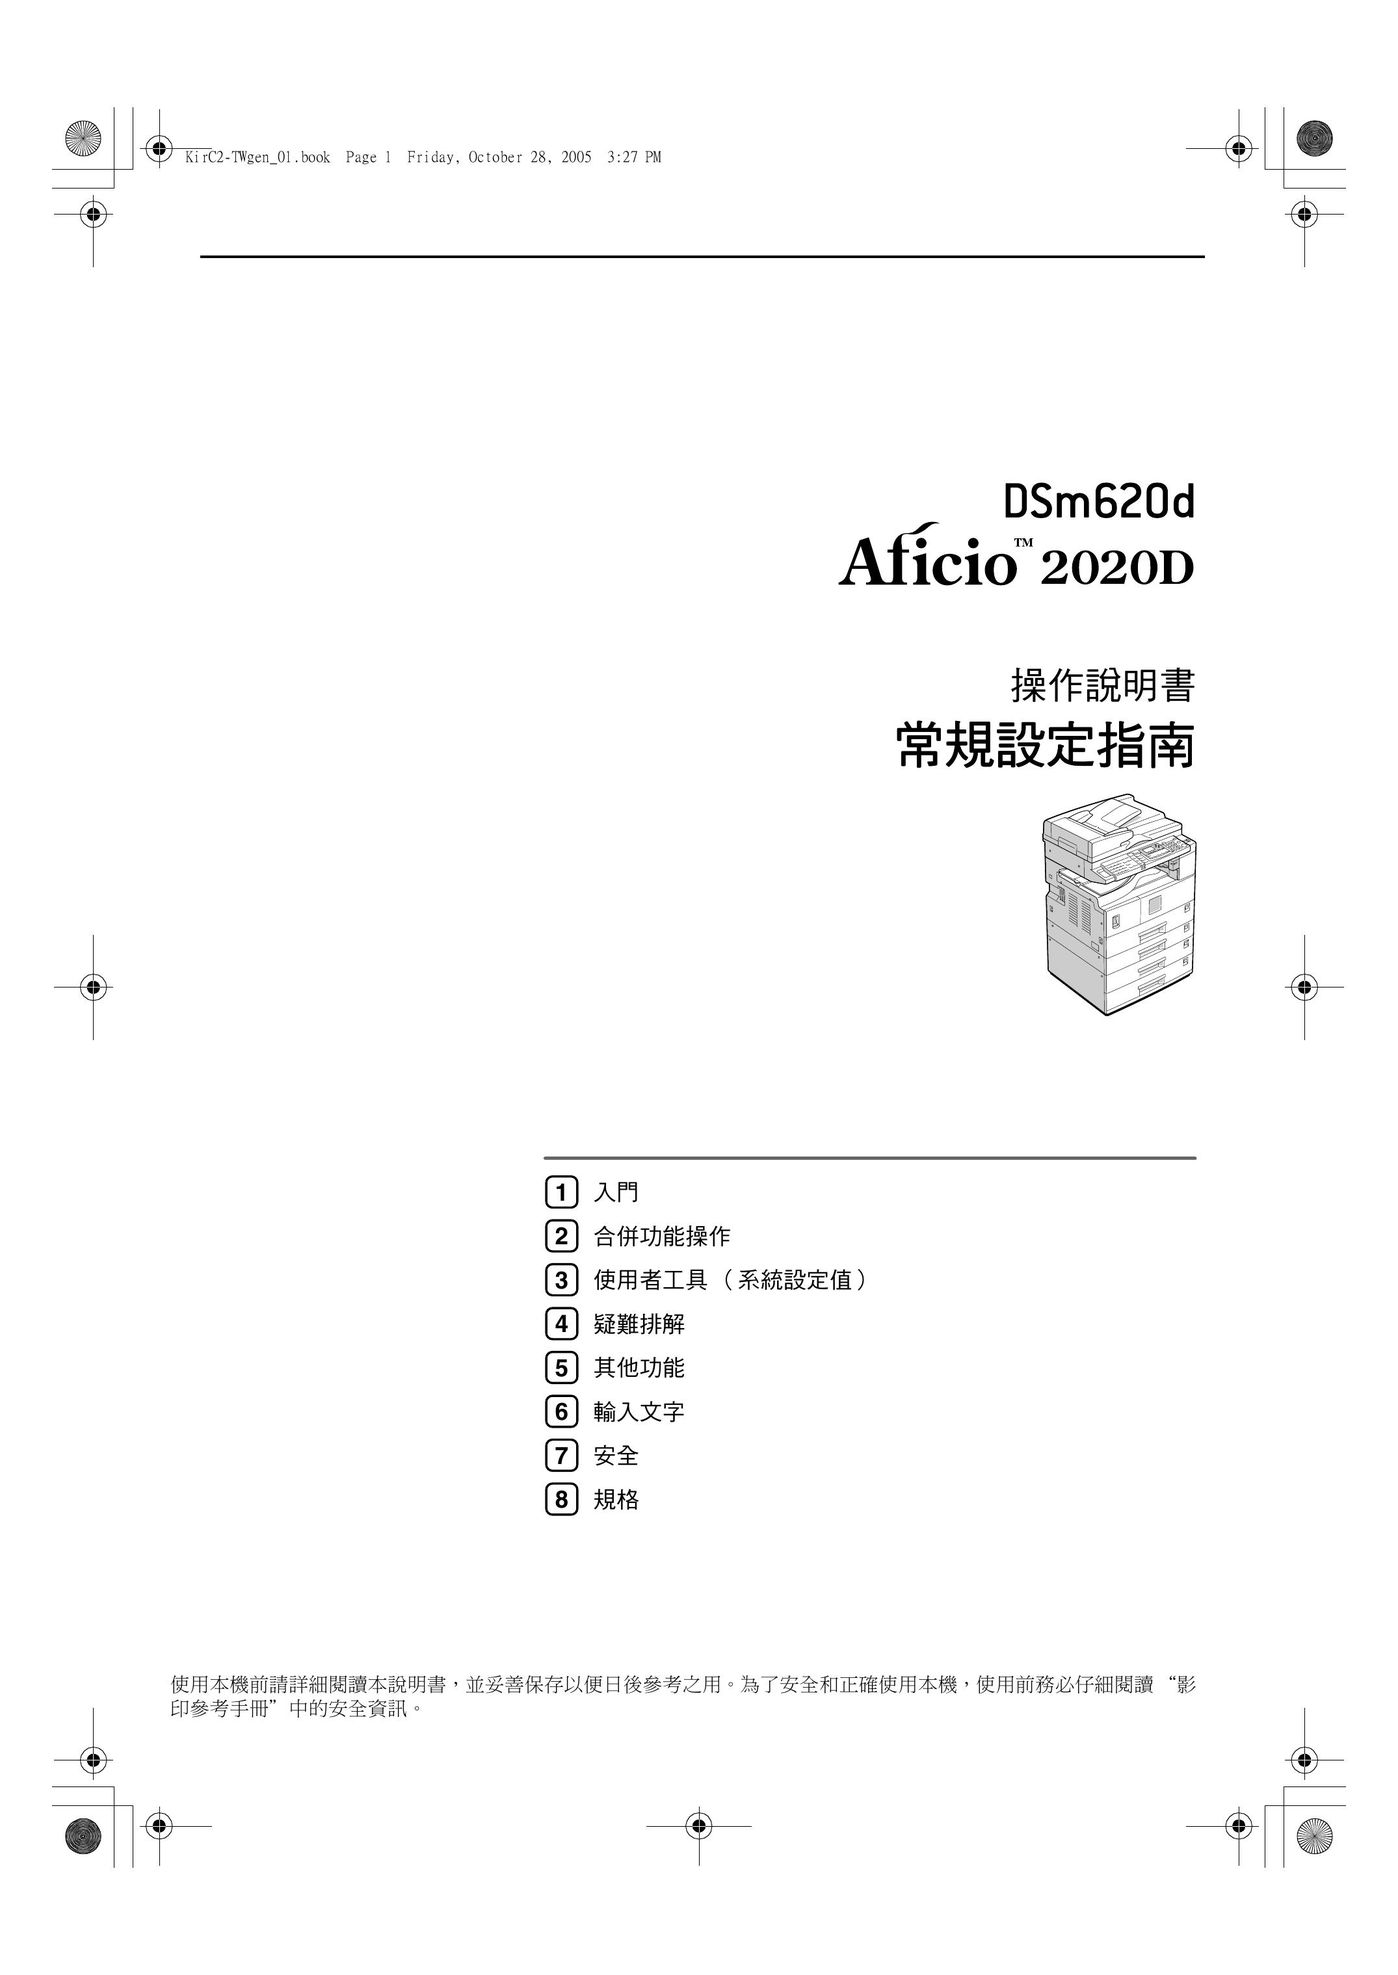 Ricoh 2020D All in One Printer User Manual